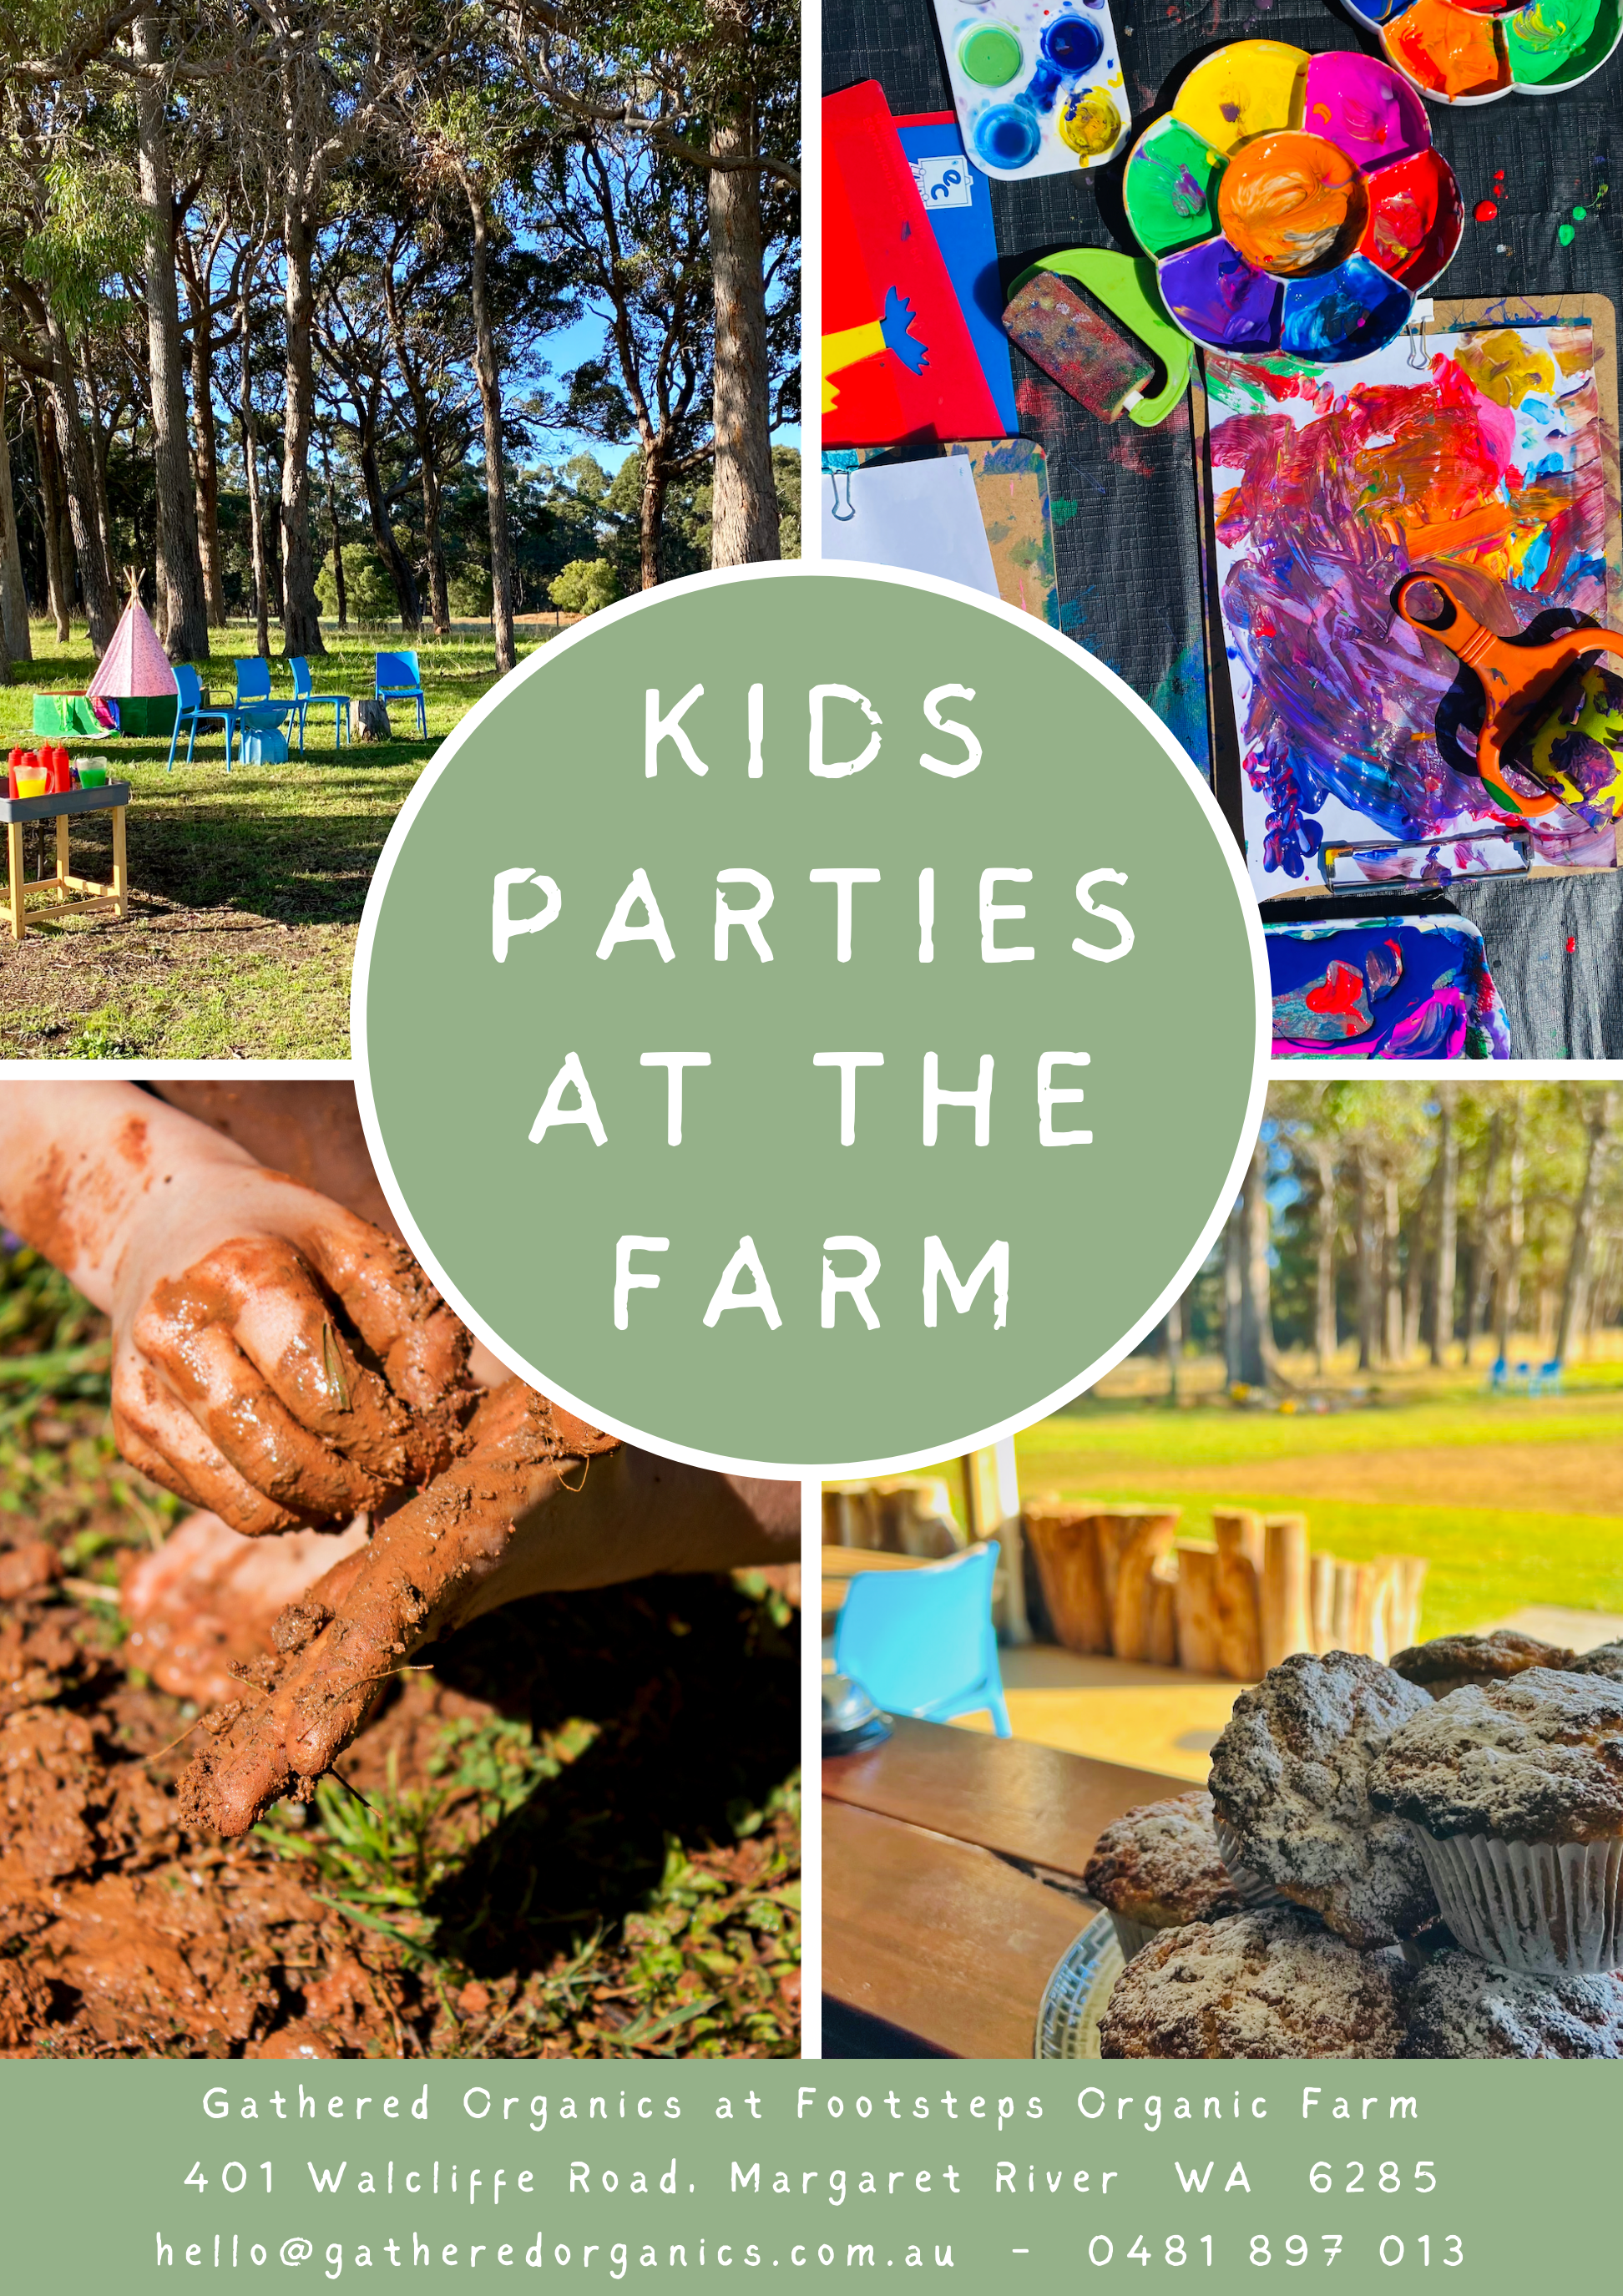 Kids parties at the farm